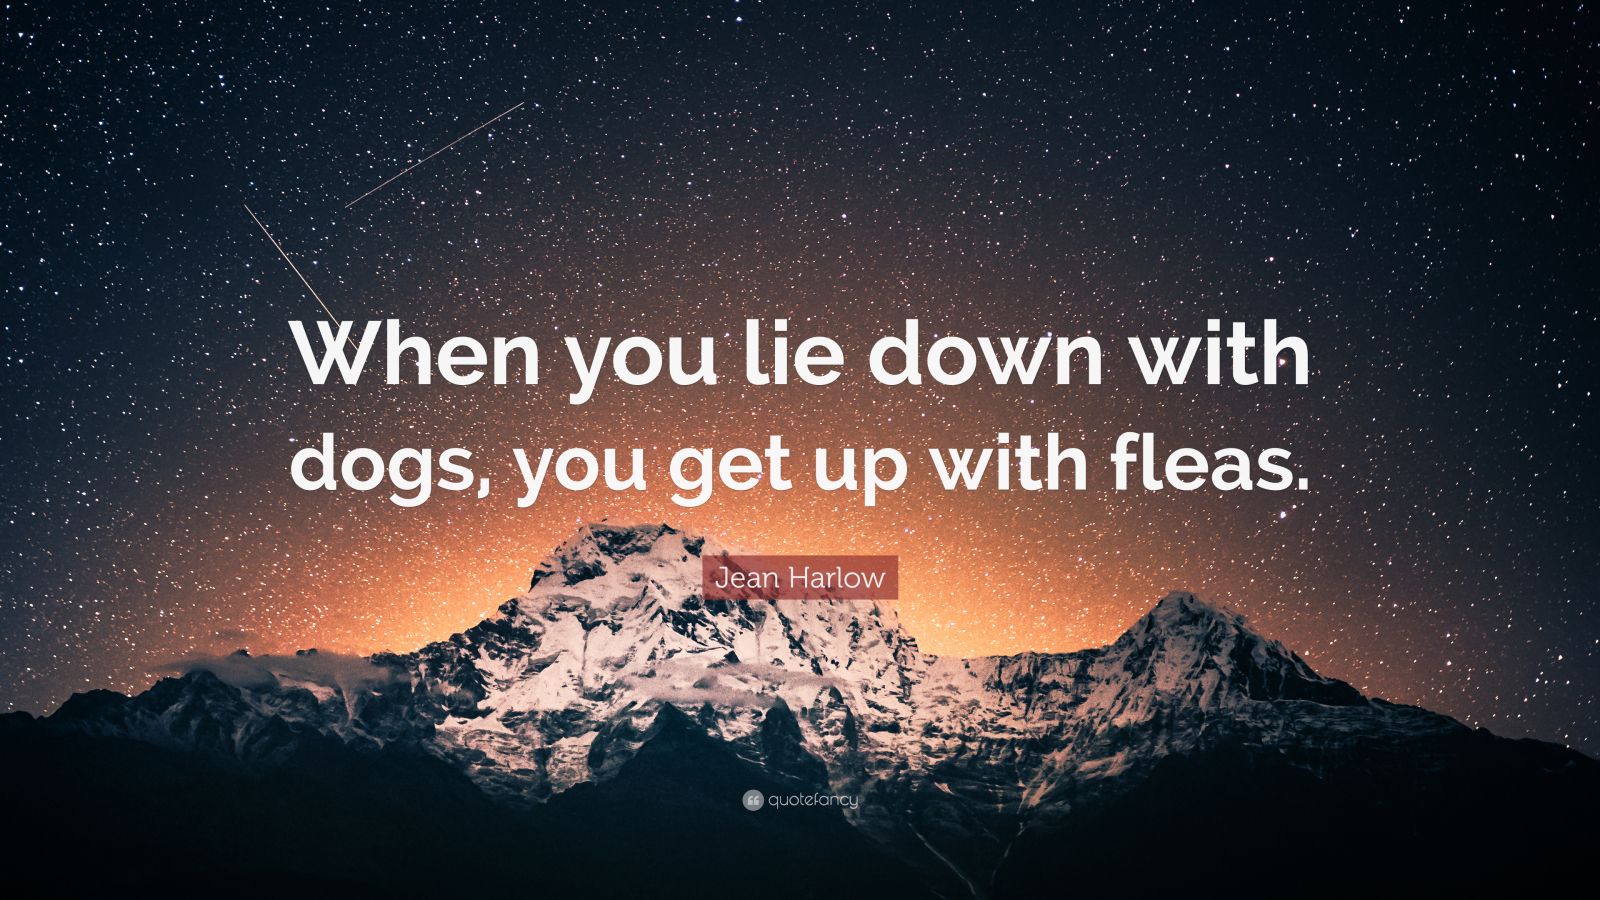 Jean Harlow Quote: “When you lie down with dogs, you get up with fleas.” (7 wallpapers) - Quotefancy